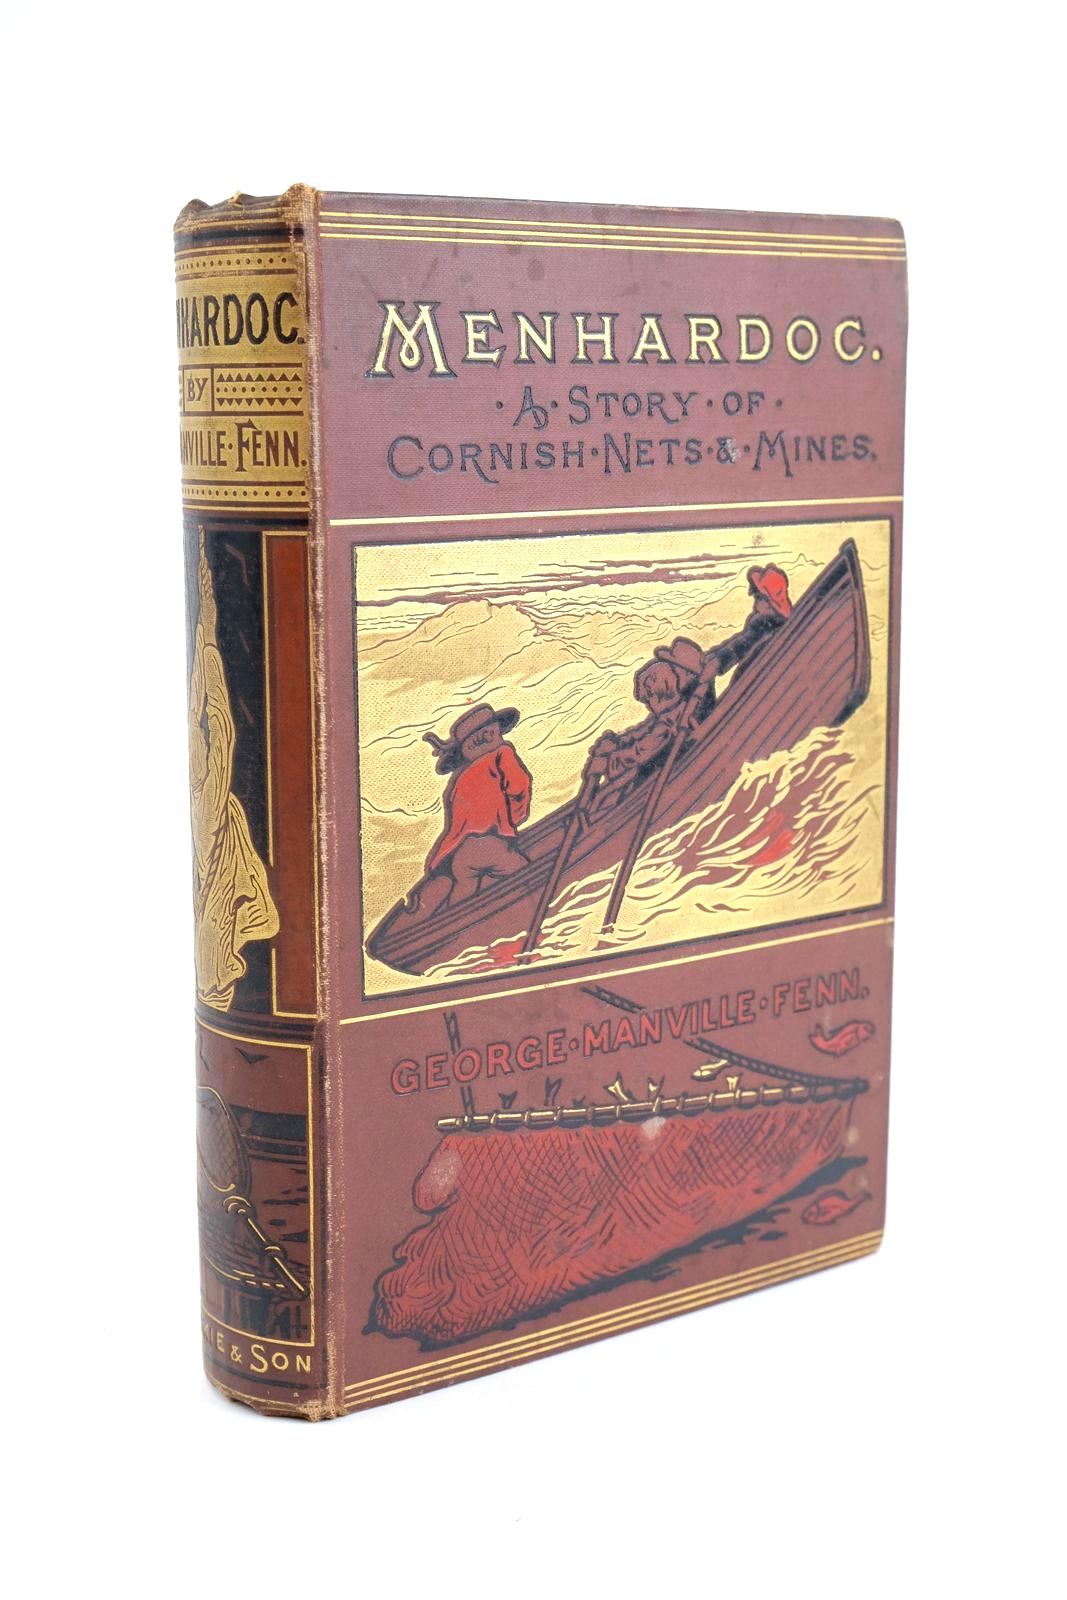 Photo of MENHARDOC written by Fenn, George Manville illustrated by Staniland, C.J. published by Blackie & Son (STOCK CODE: 1323787)  for sale by Stella & Rose's Books